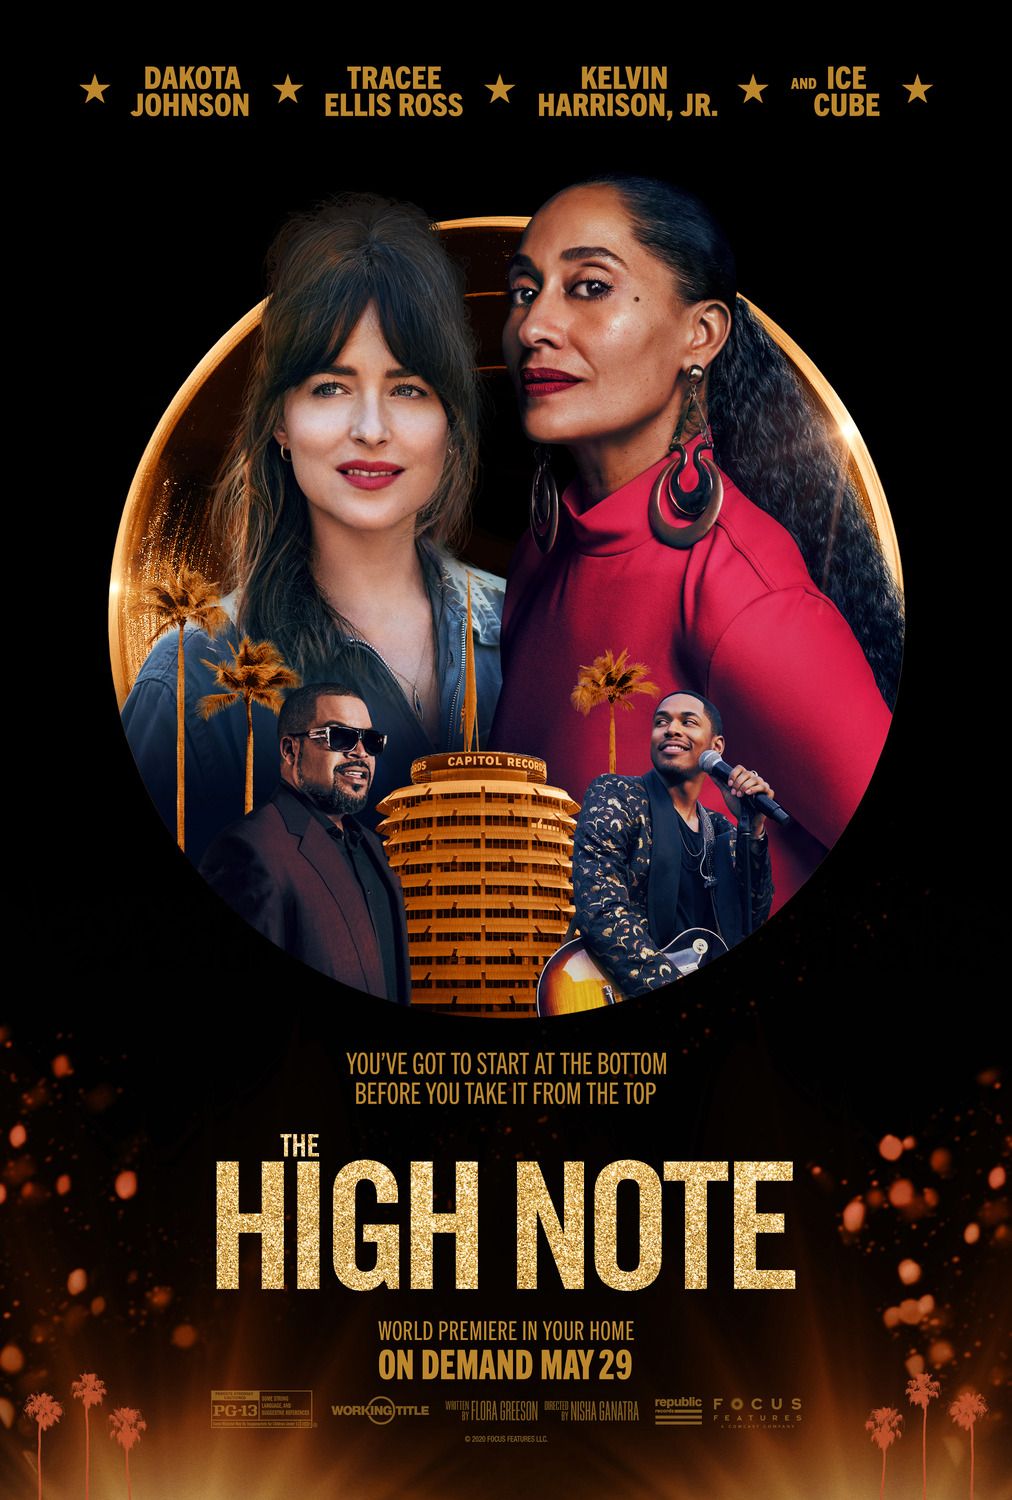 The High Note (2020) Hindi Dubbed Movie